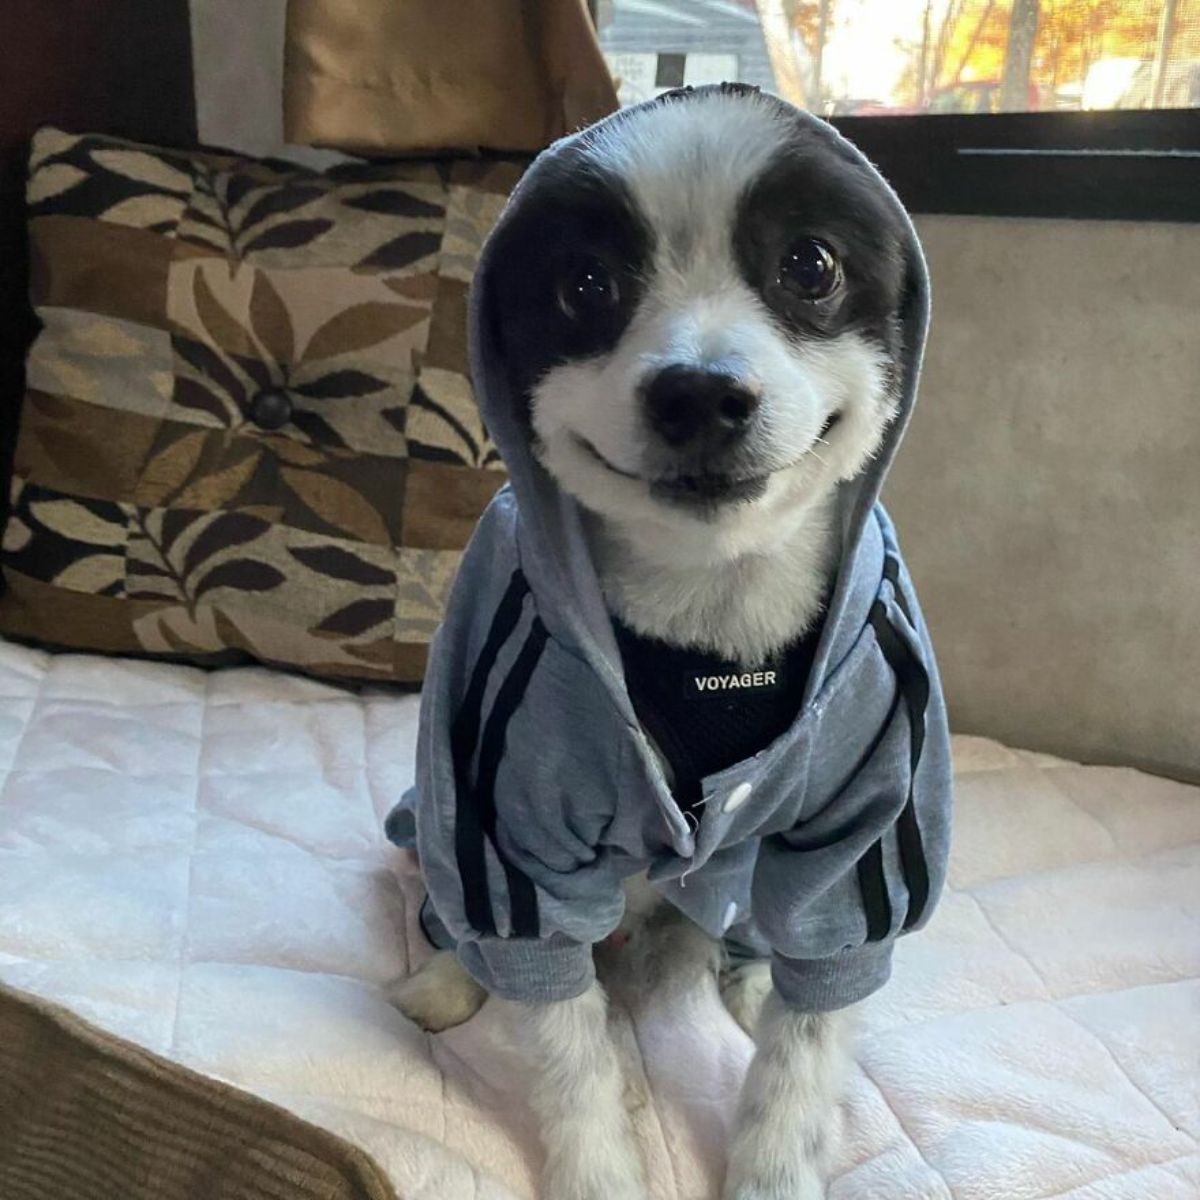 black and white dog who looks like he's smiling sitting on a white sofa wearing a grey and black hoodie